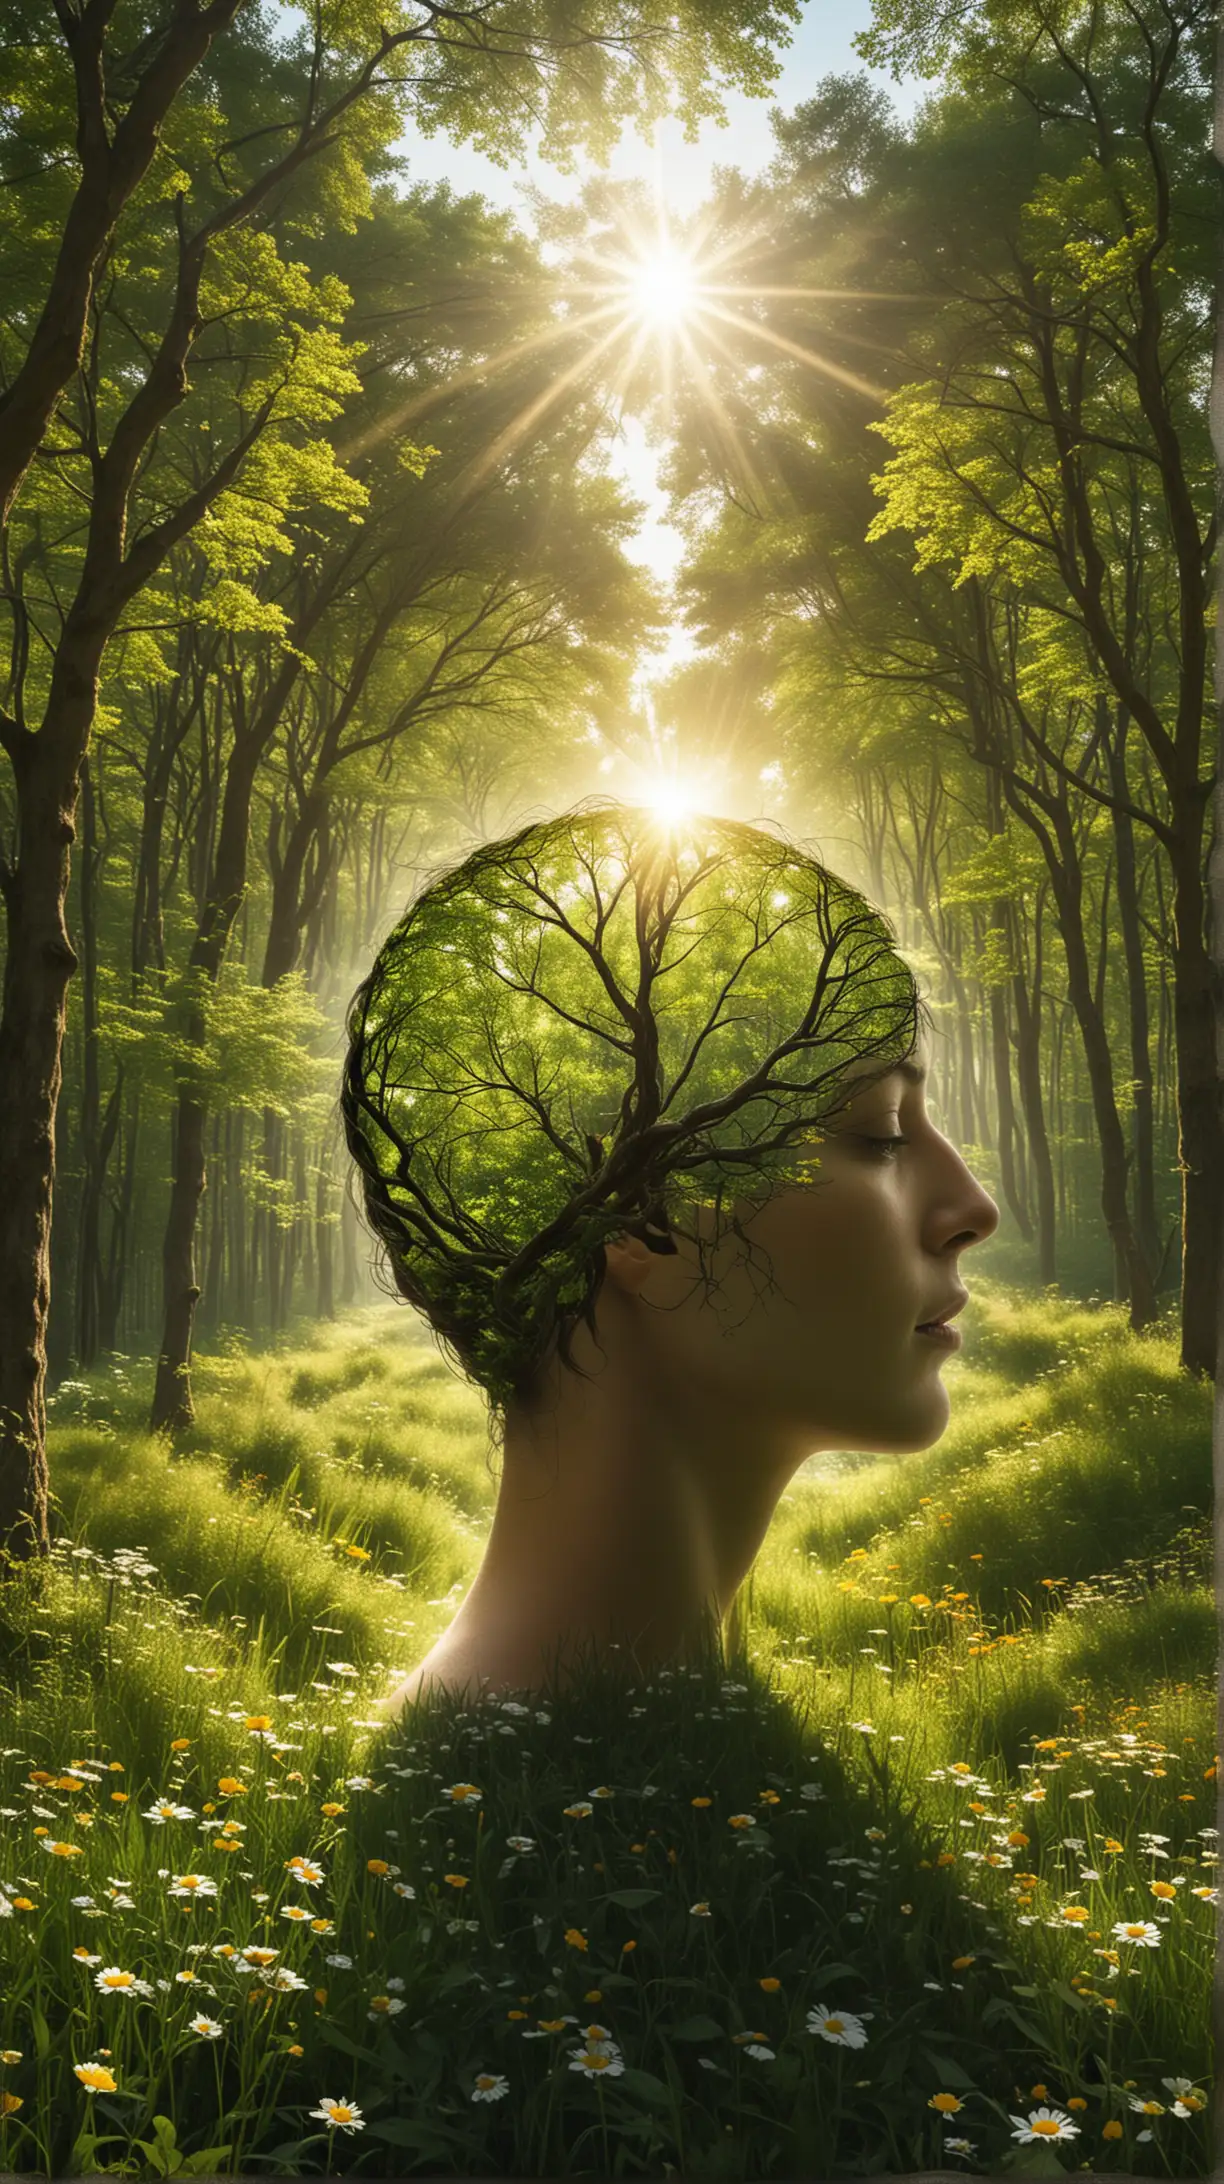 VISUALIZE THE CONCEPT OF AN ARMONIZED MIND IS THE PATH TO CLARITY, IN A CLEAR LANDSCAPE WITH NATURE AND SUNLIGHT 

